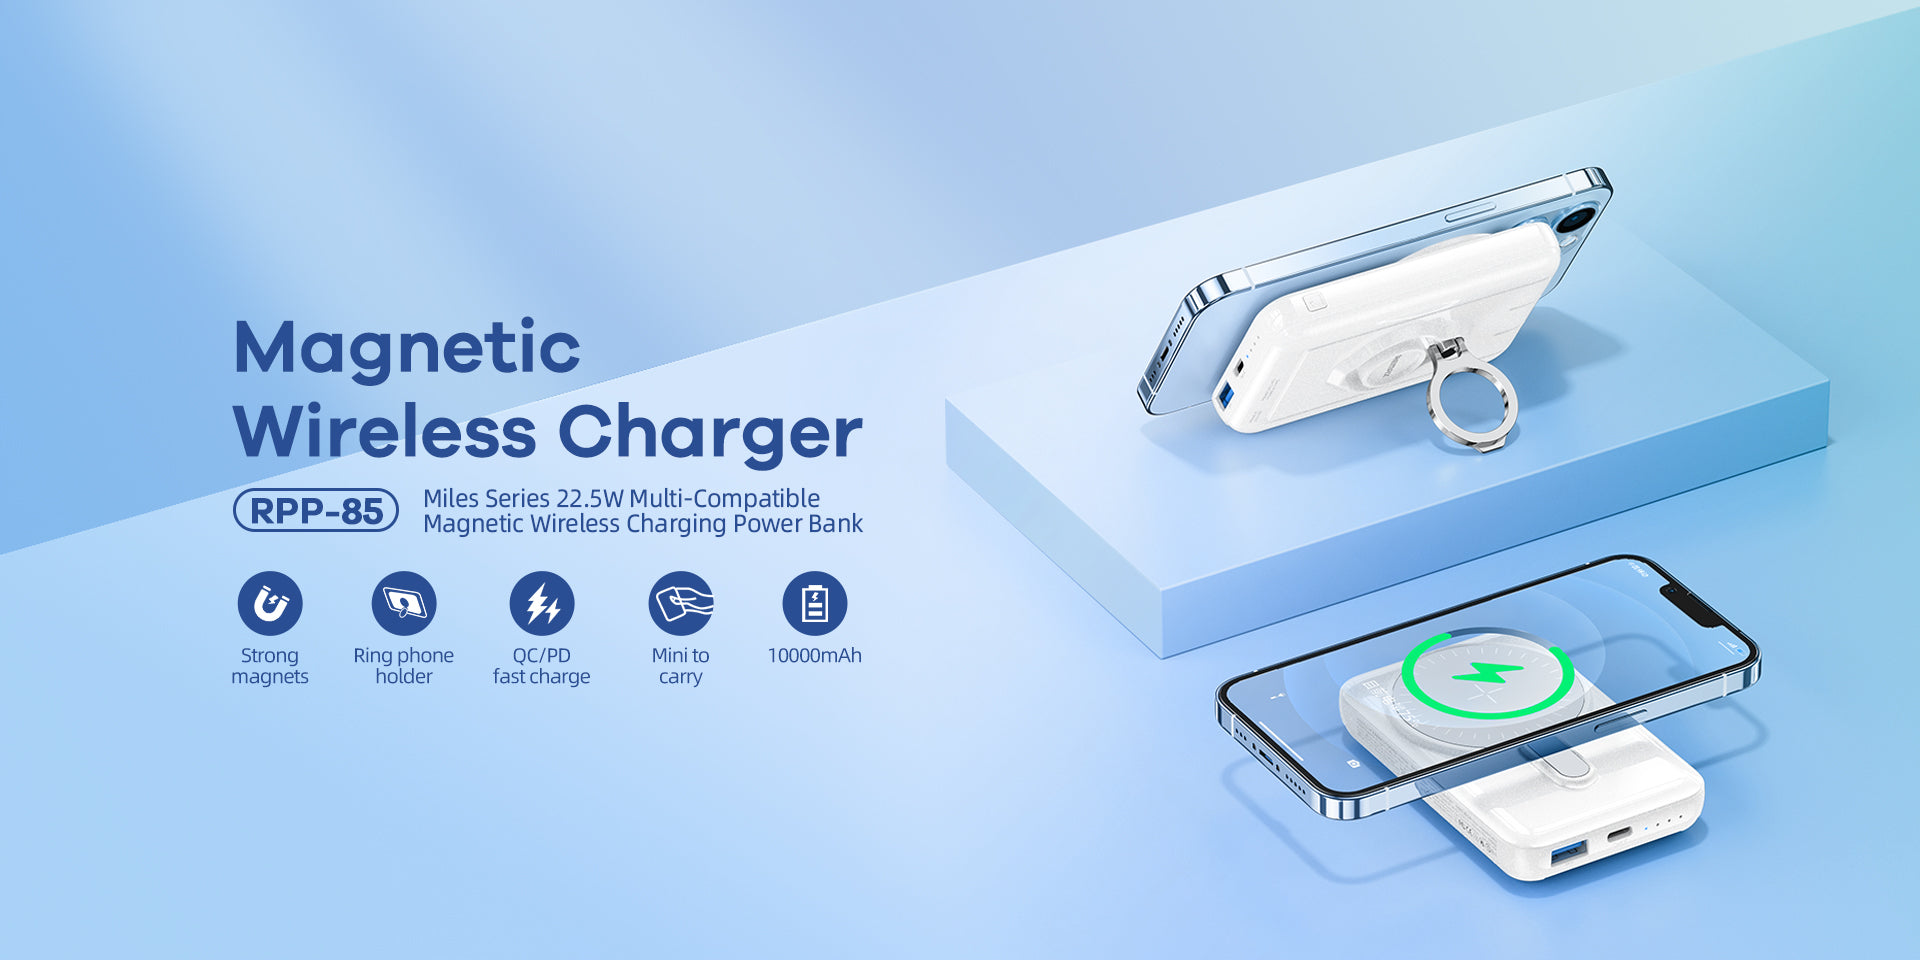 Miles Series 22.5W Multi-Compatible Magnetic Wireless Charging Power Bank 10000mAh RPP-85